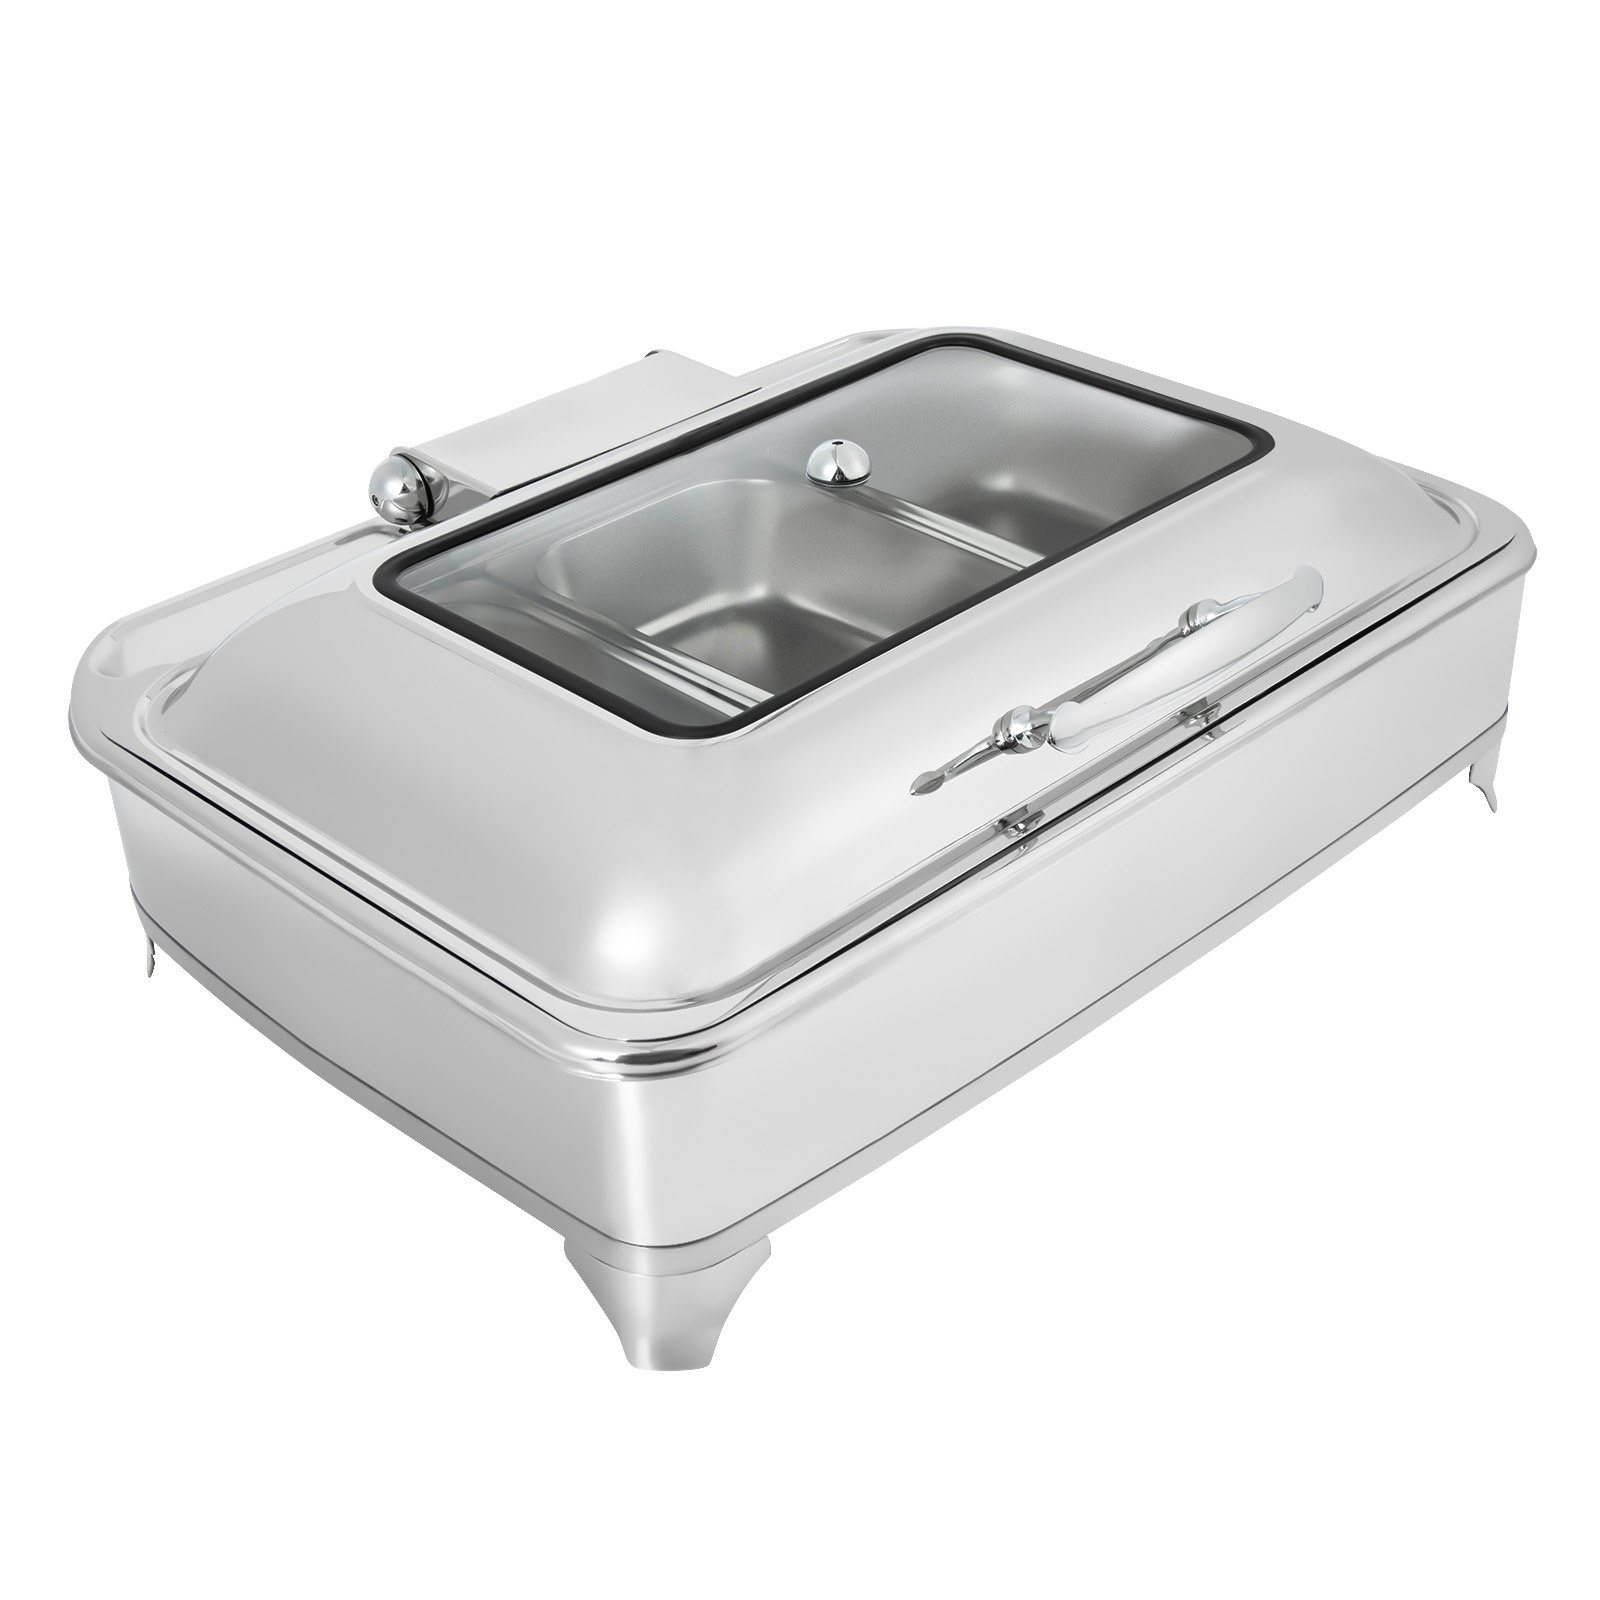 Commercial Electric Chafing Dish Buffet 7.4 Qt Countertop Food Warmer Steam  Table Pan Stainless